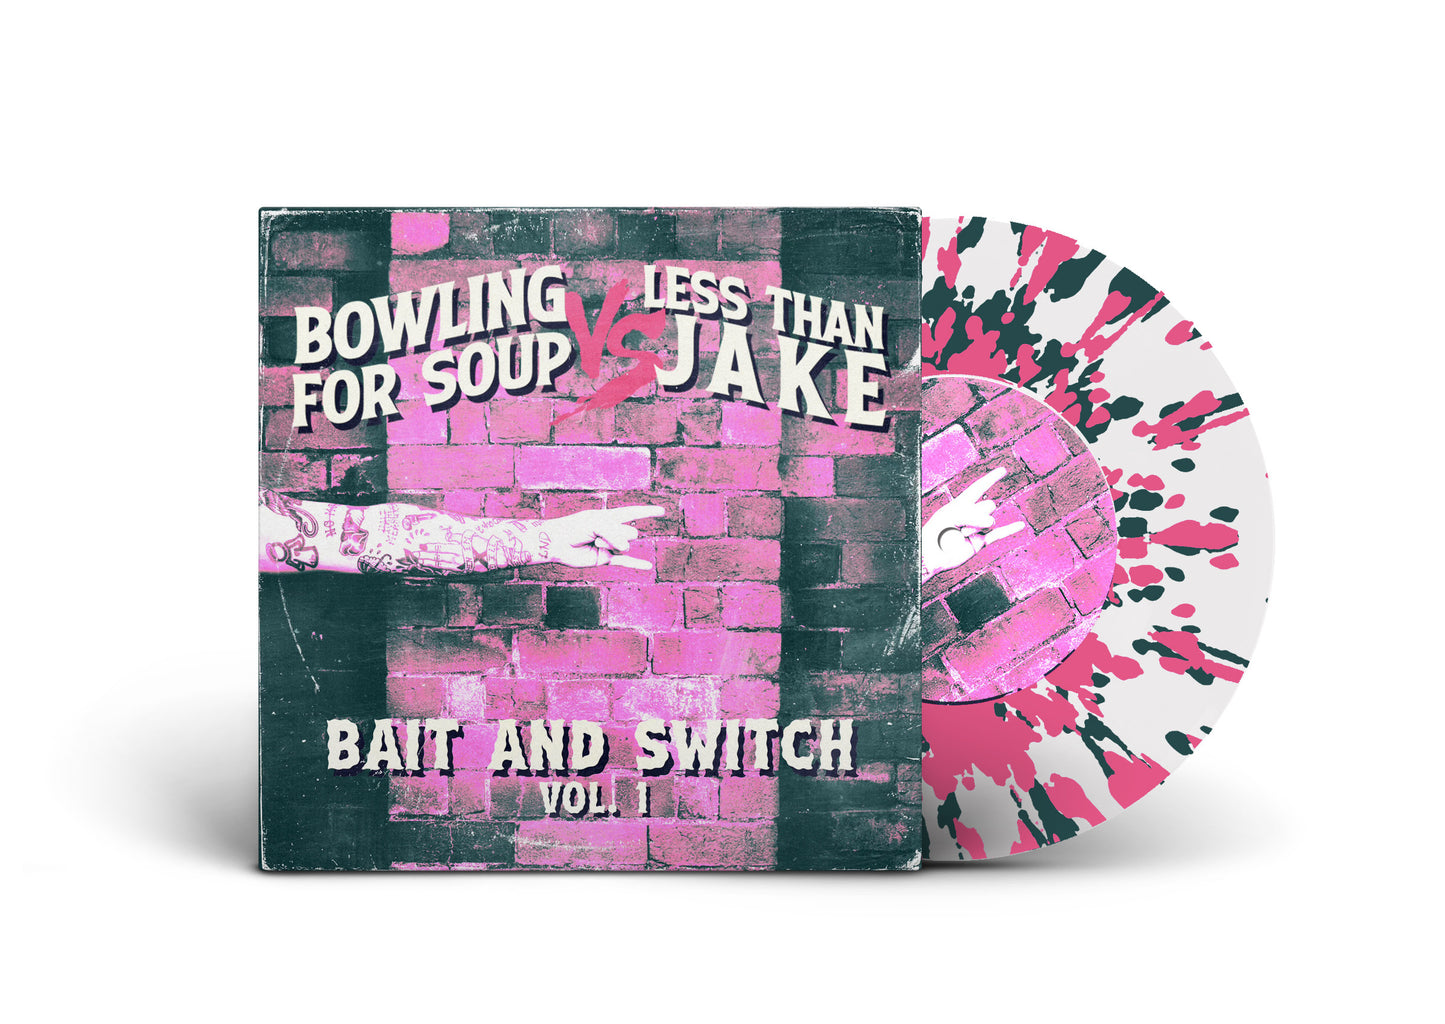 BOWLING FOR SOUP / LESS THAN JAKE - "Bait And Switch Vol. 1" (SBAM) (7")